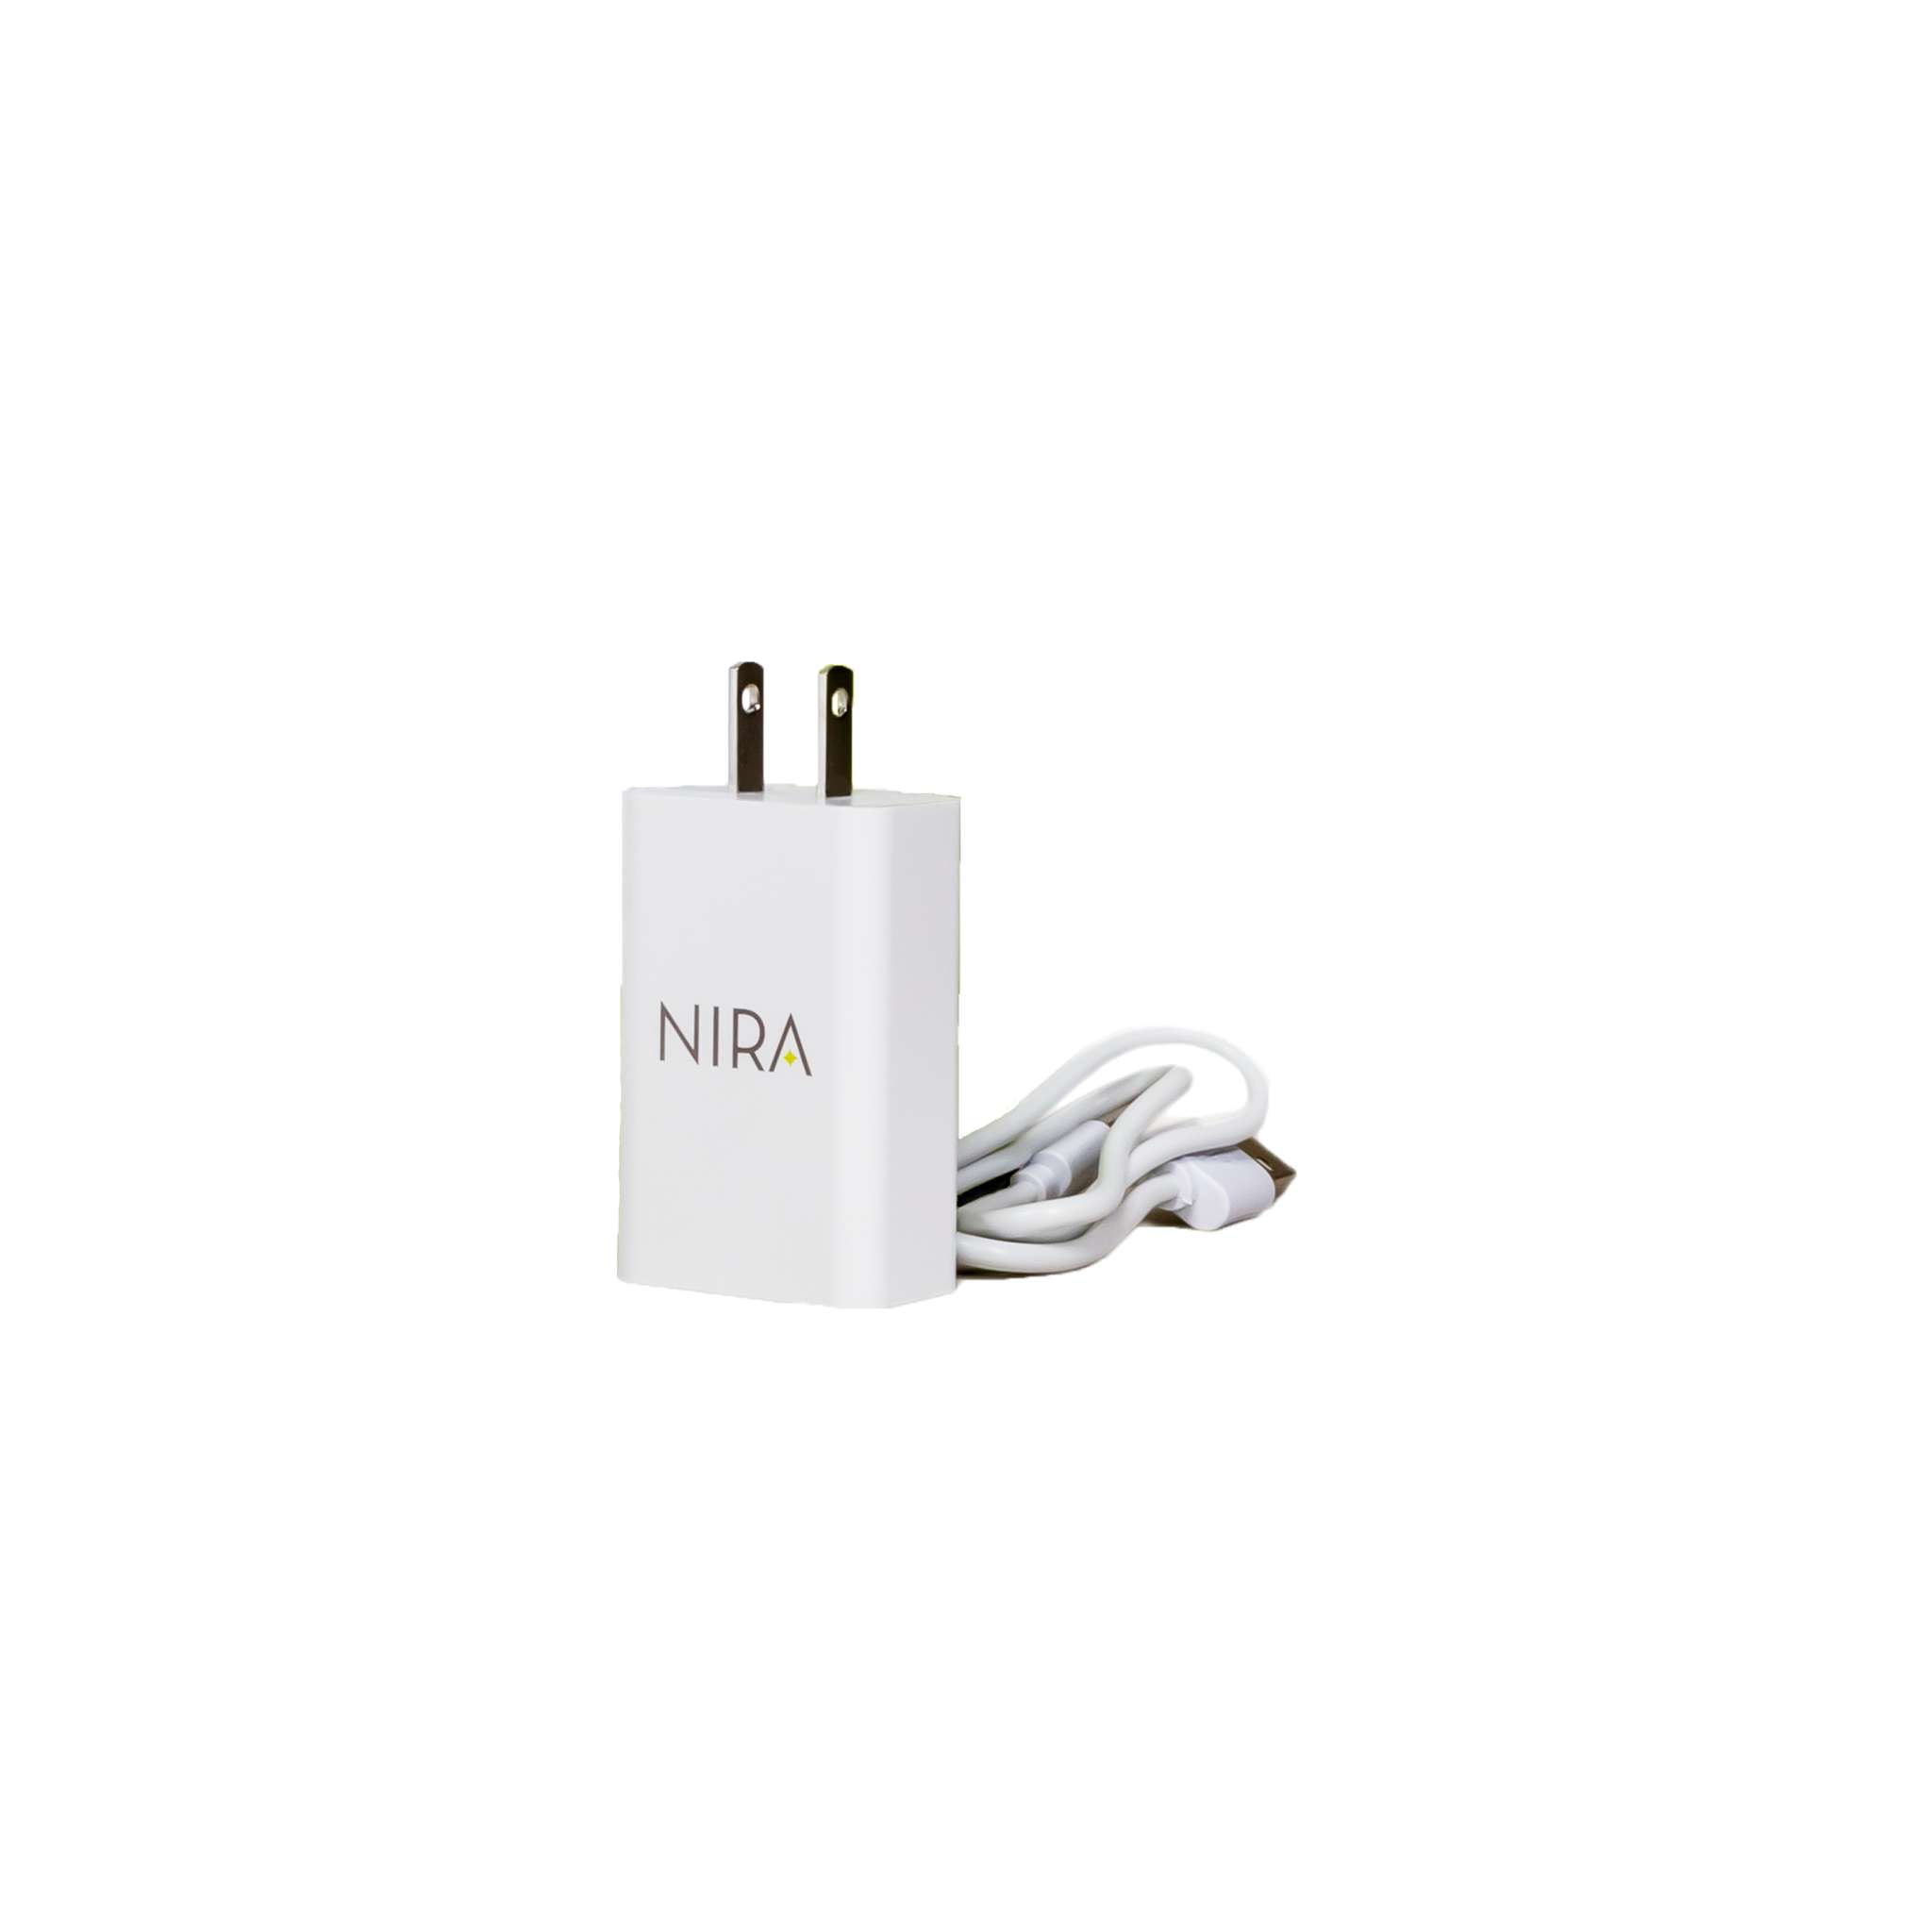 Nira charger for efficient at home laser eye treatment